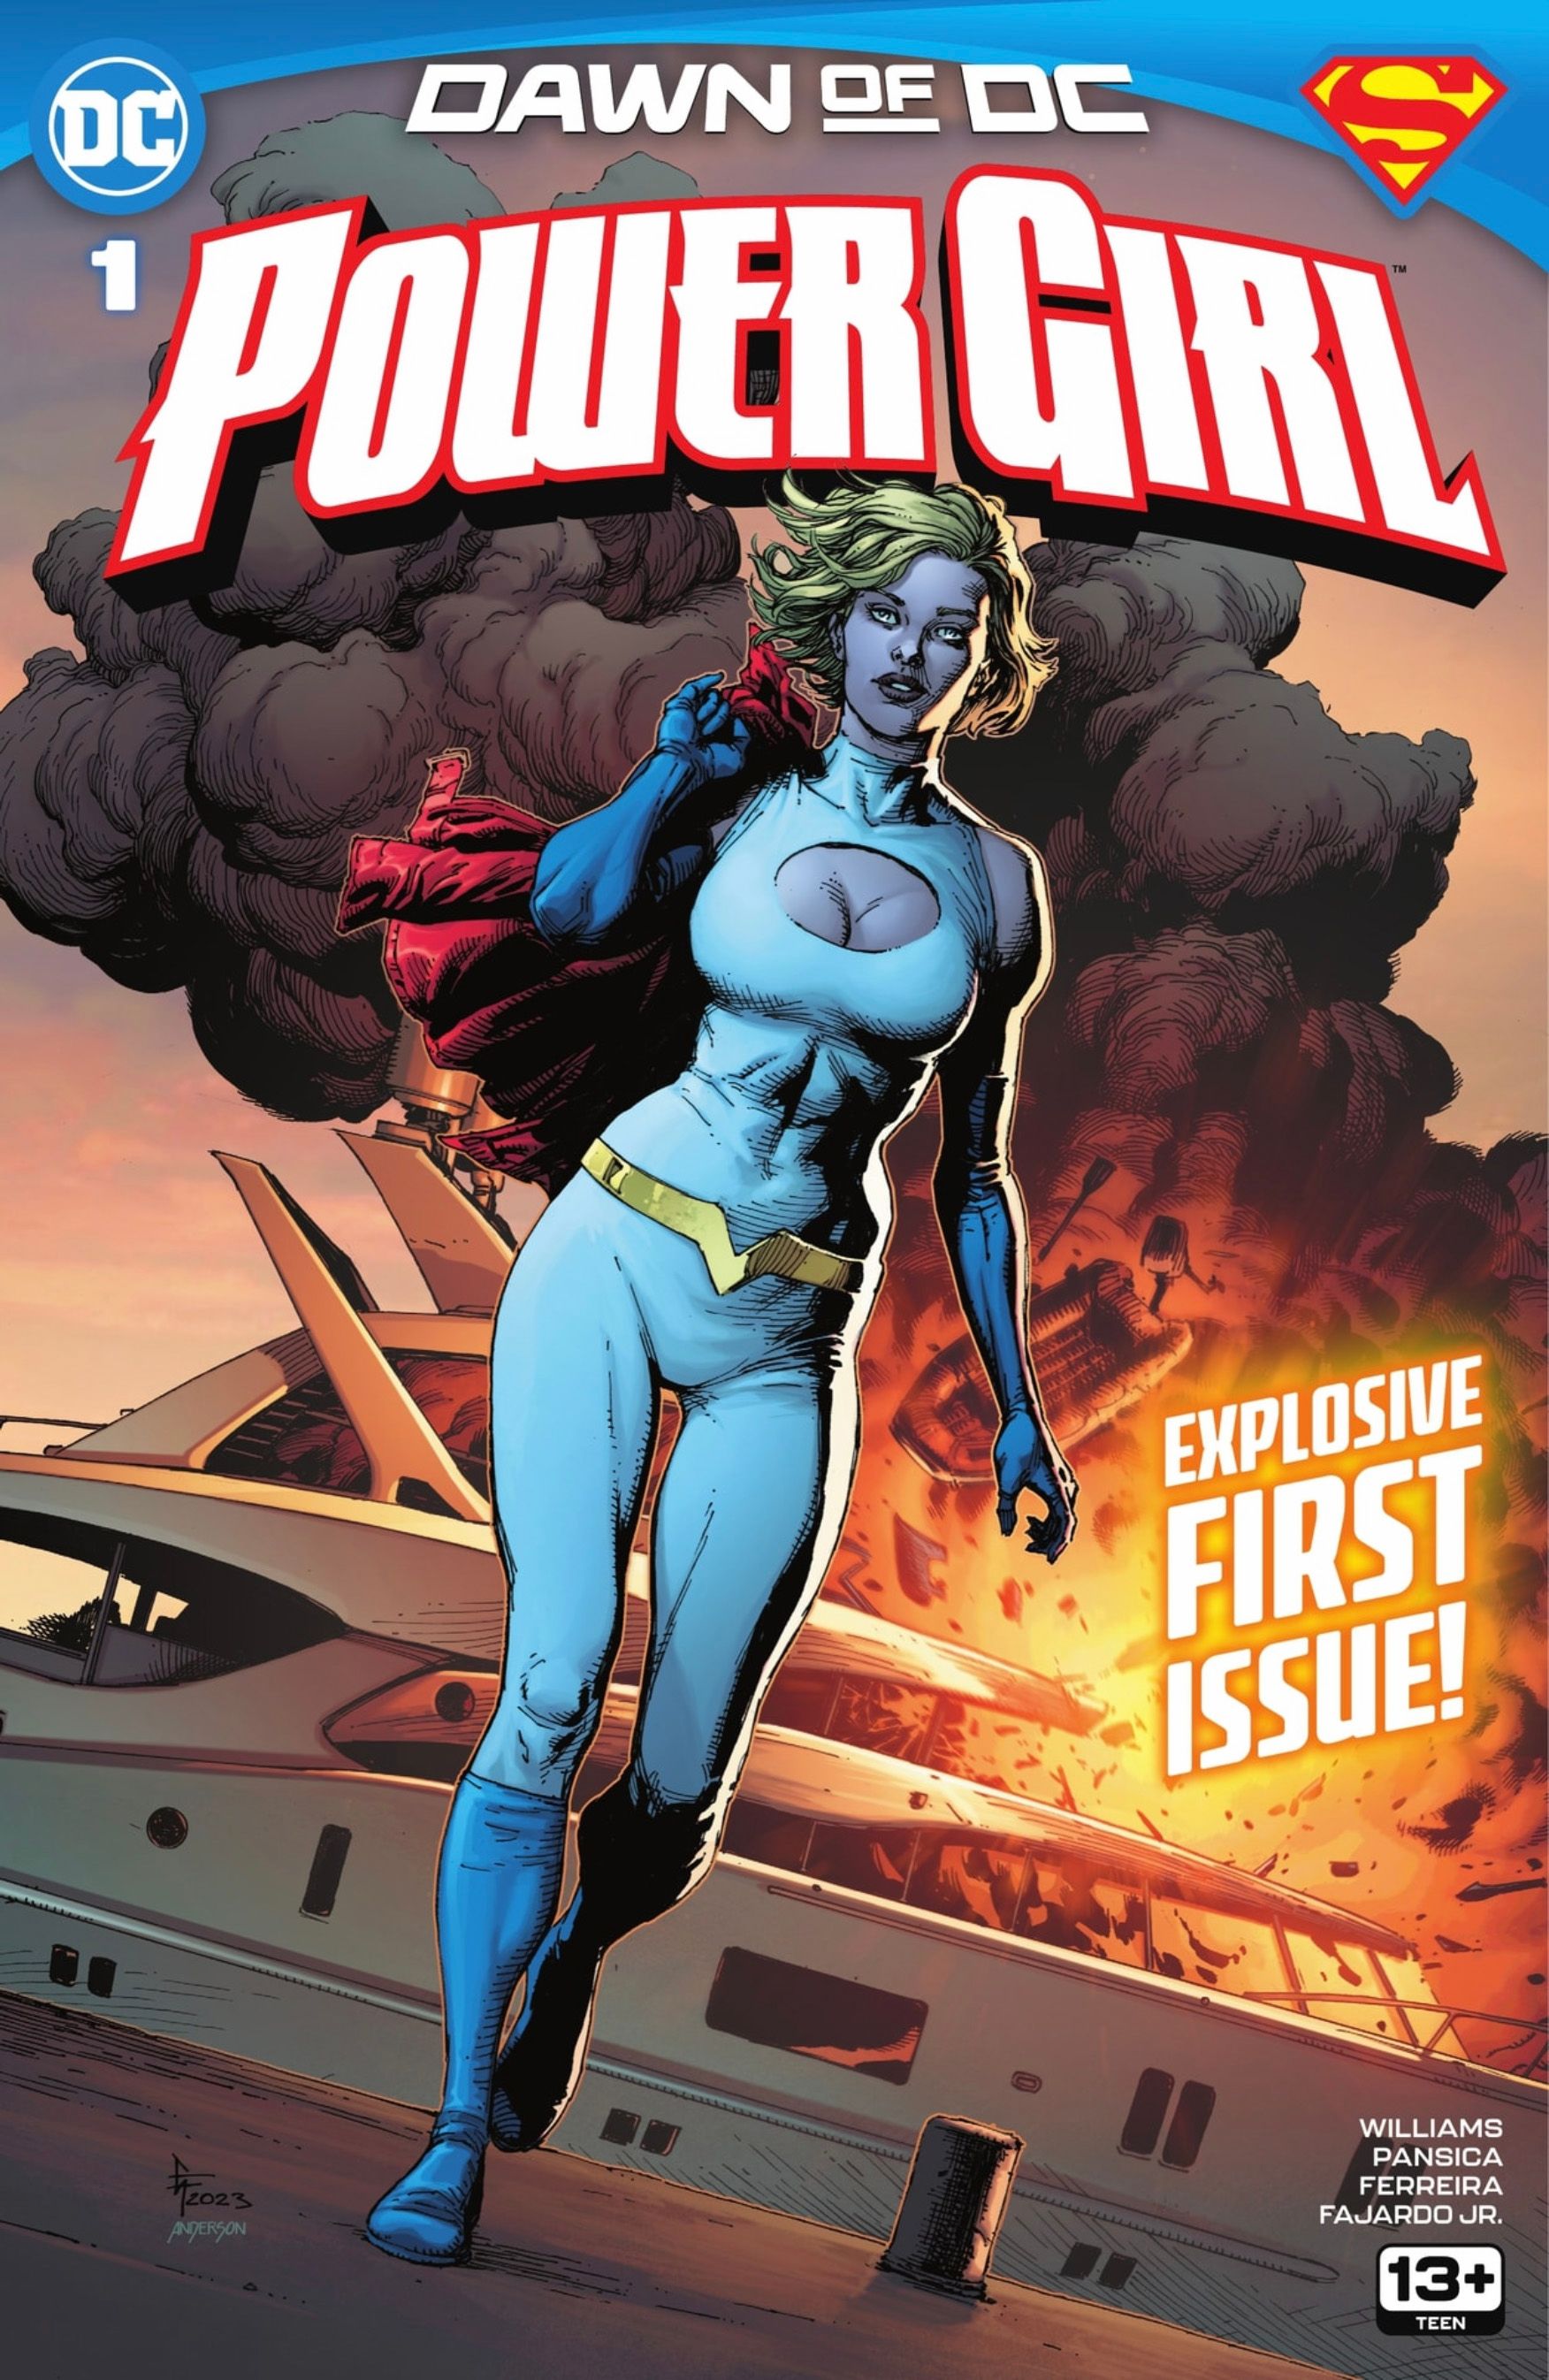 Cover A of Power Girl #1